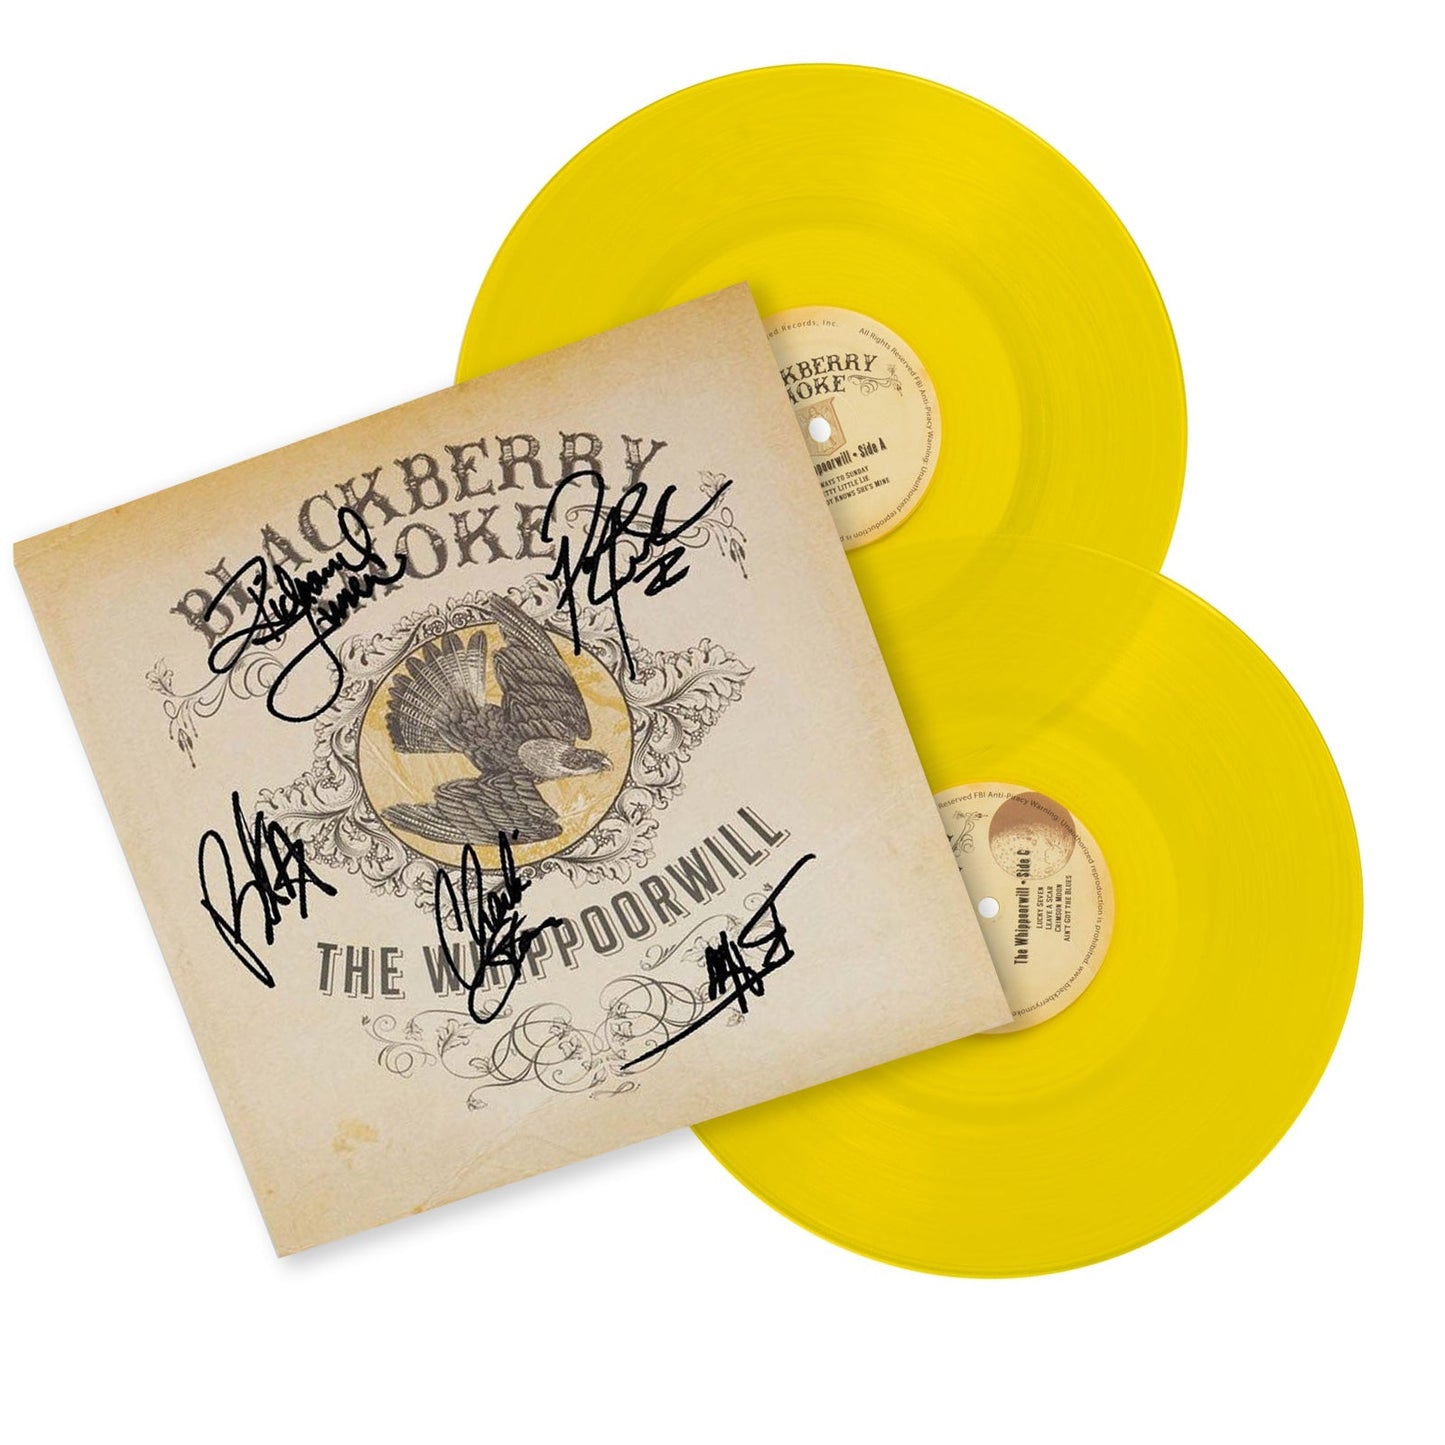 SIGNED THE WHIPPOORWILL VINYL